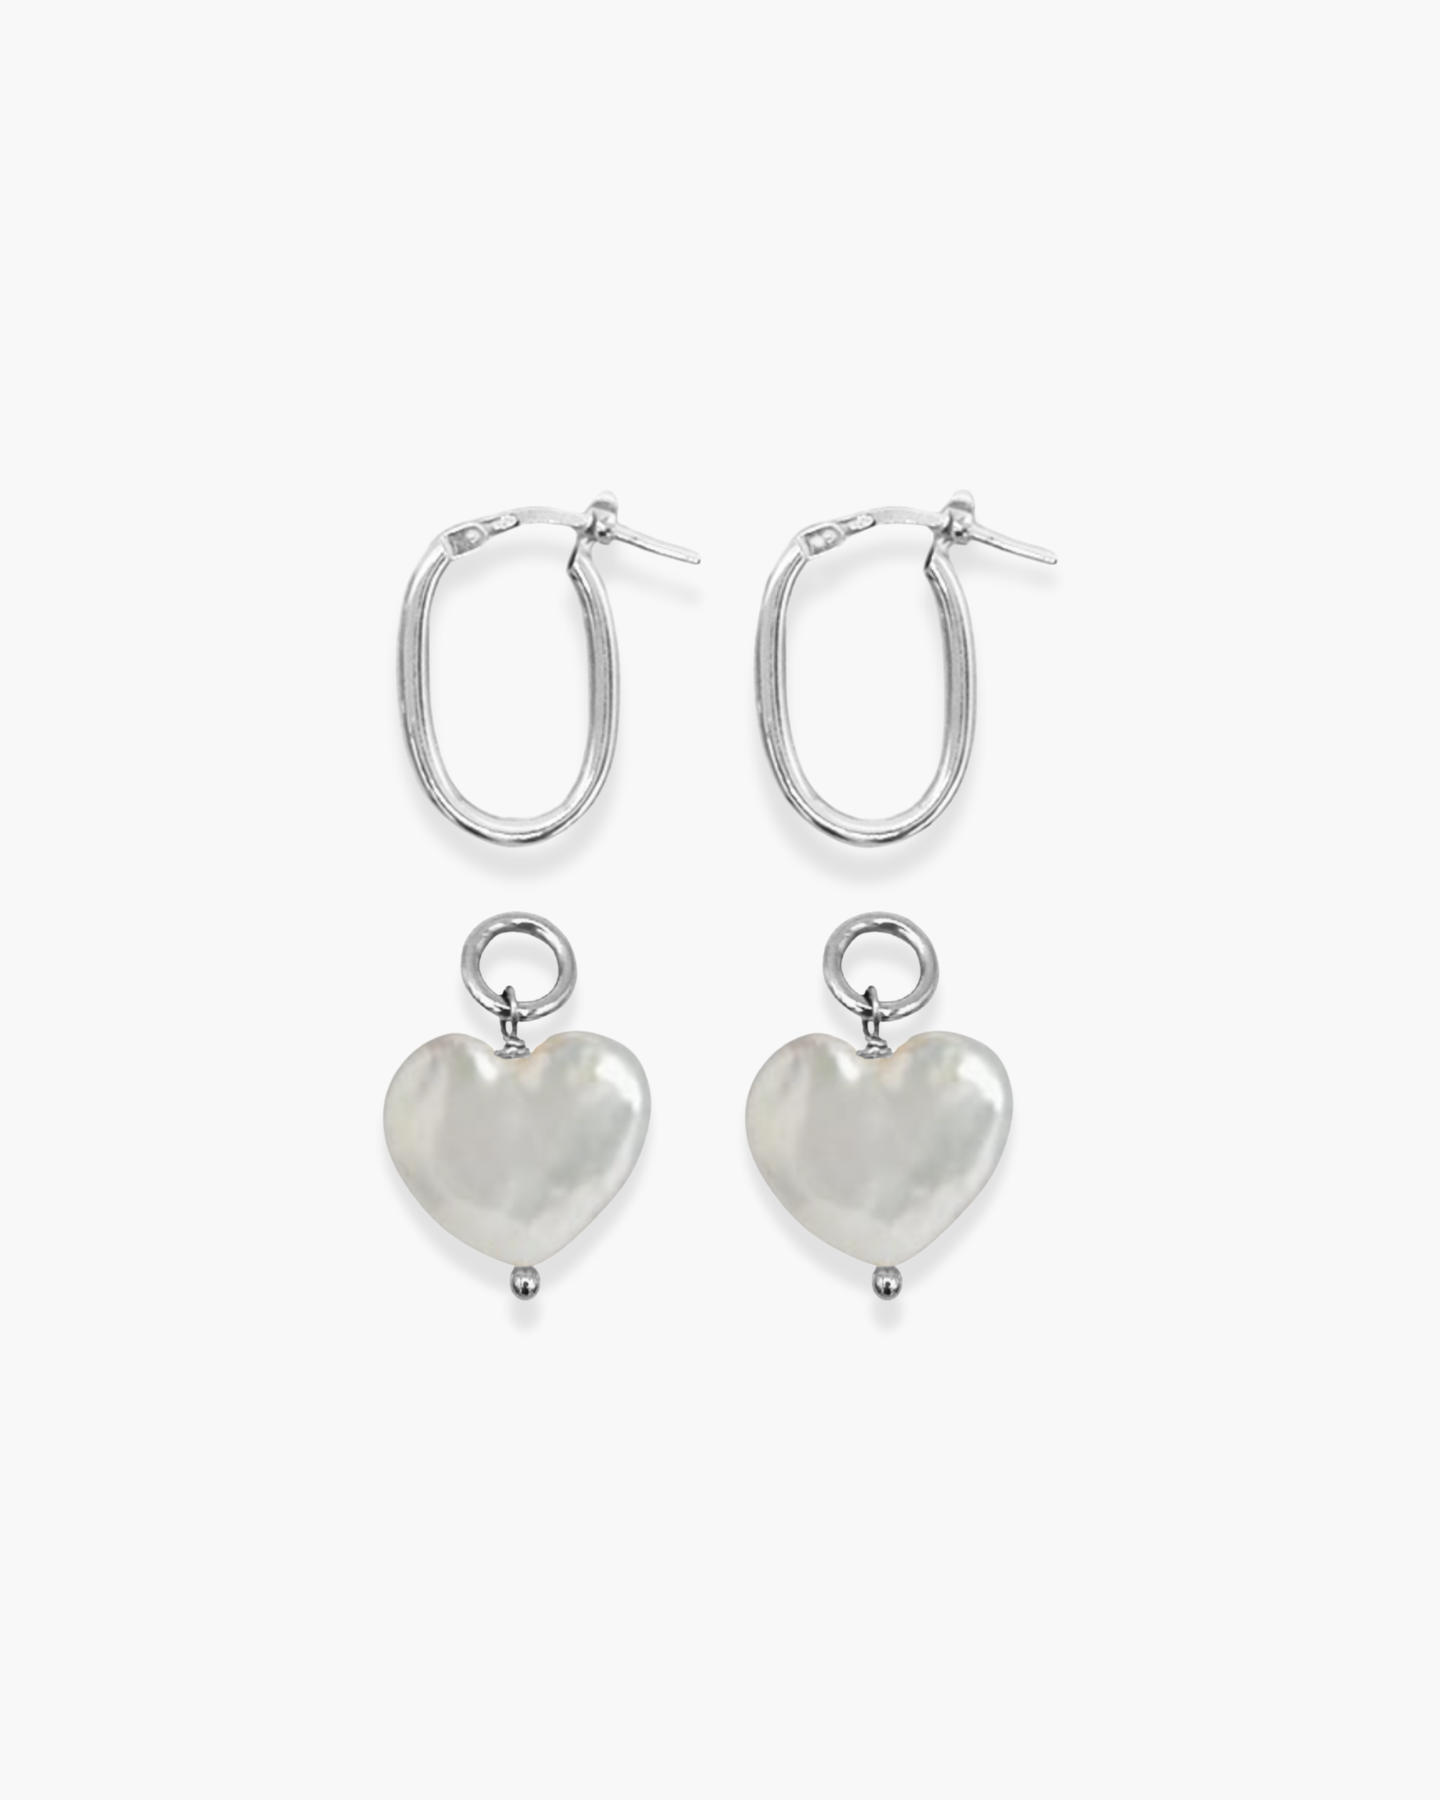 Lovey Dovey Pearl Charm Silver